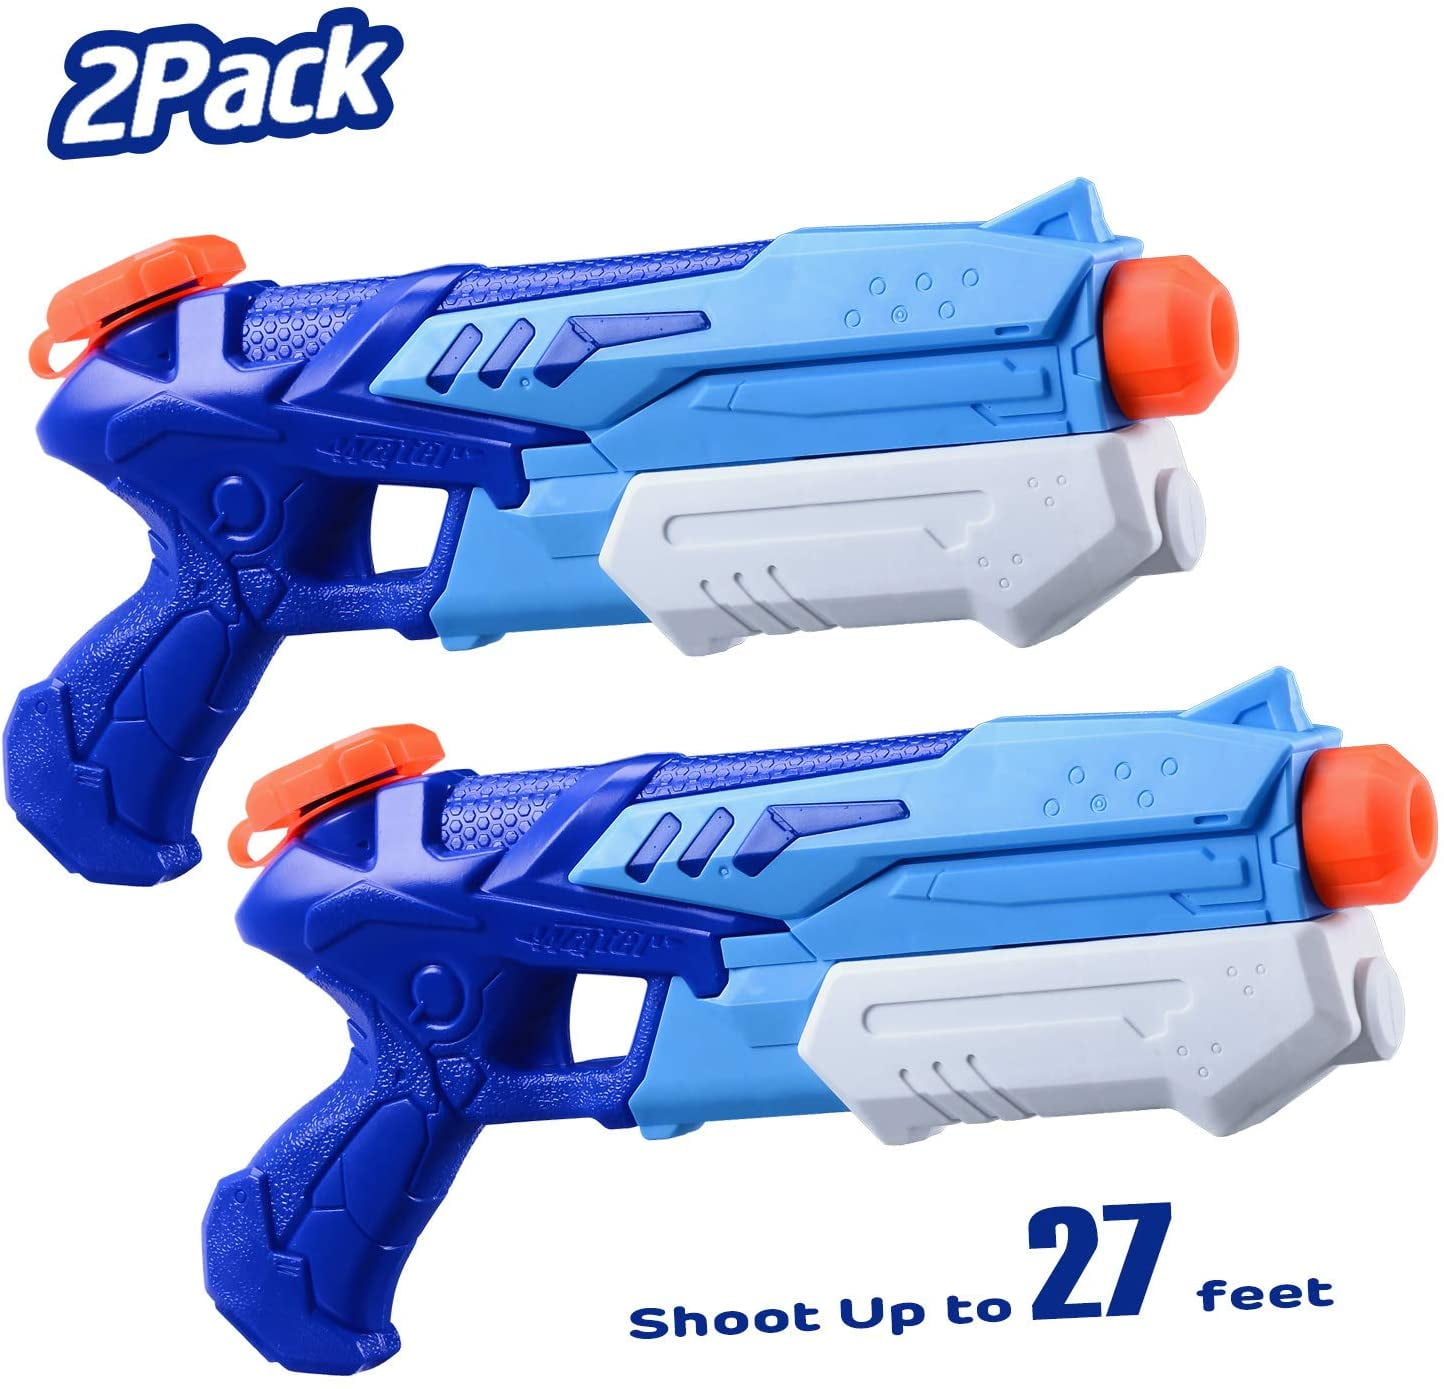 2 Pack Super Water Blaster Soaker 400CC Squirt Guns for Swimming Pool Boys and Girls Water Guns for Kids Cool Birthday Party Favors for Adults Beach and Outdoor Summer Fun